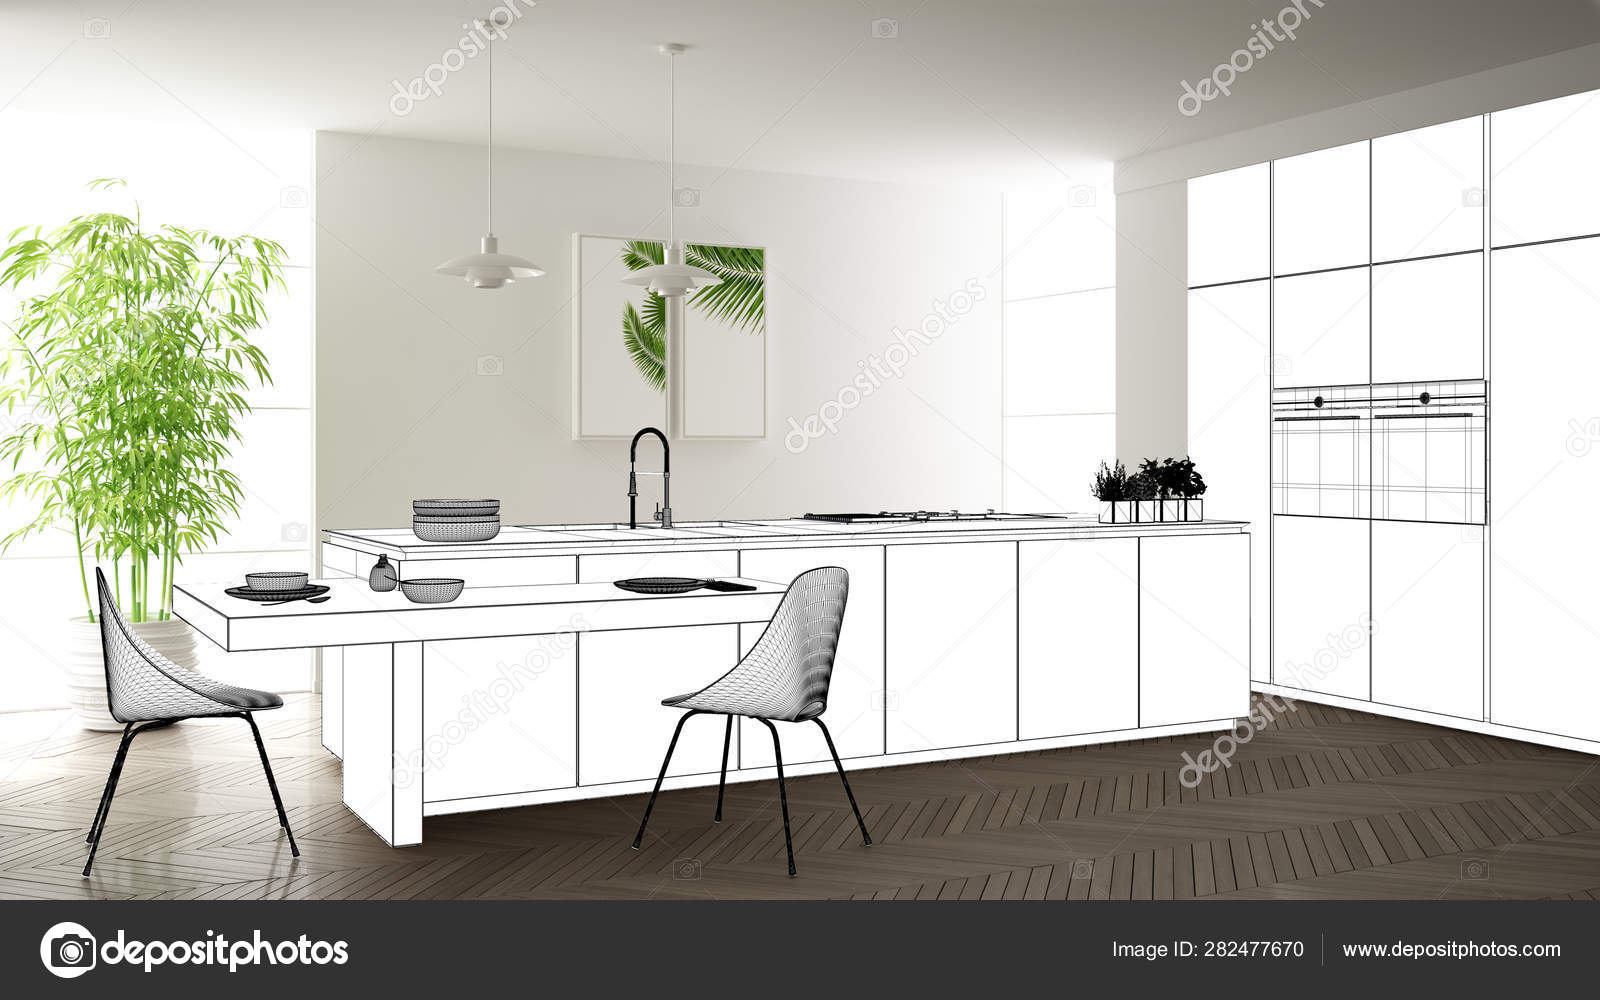 Blueprint Project Draft Sketch Of Minimalist Modern Kitchen With Island And Lamps Interior Design Concept Idea Modern Apartment With Parquet Floor Contemporary Furniture Idea Stock Photo Image By C Archiviz 282477670